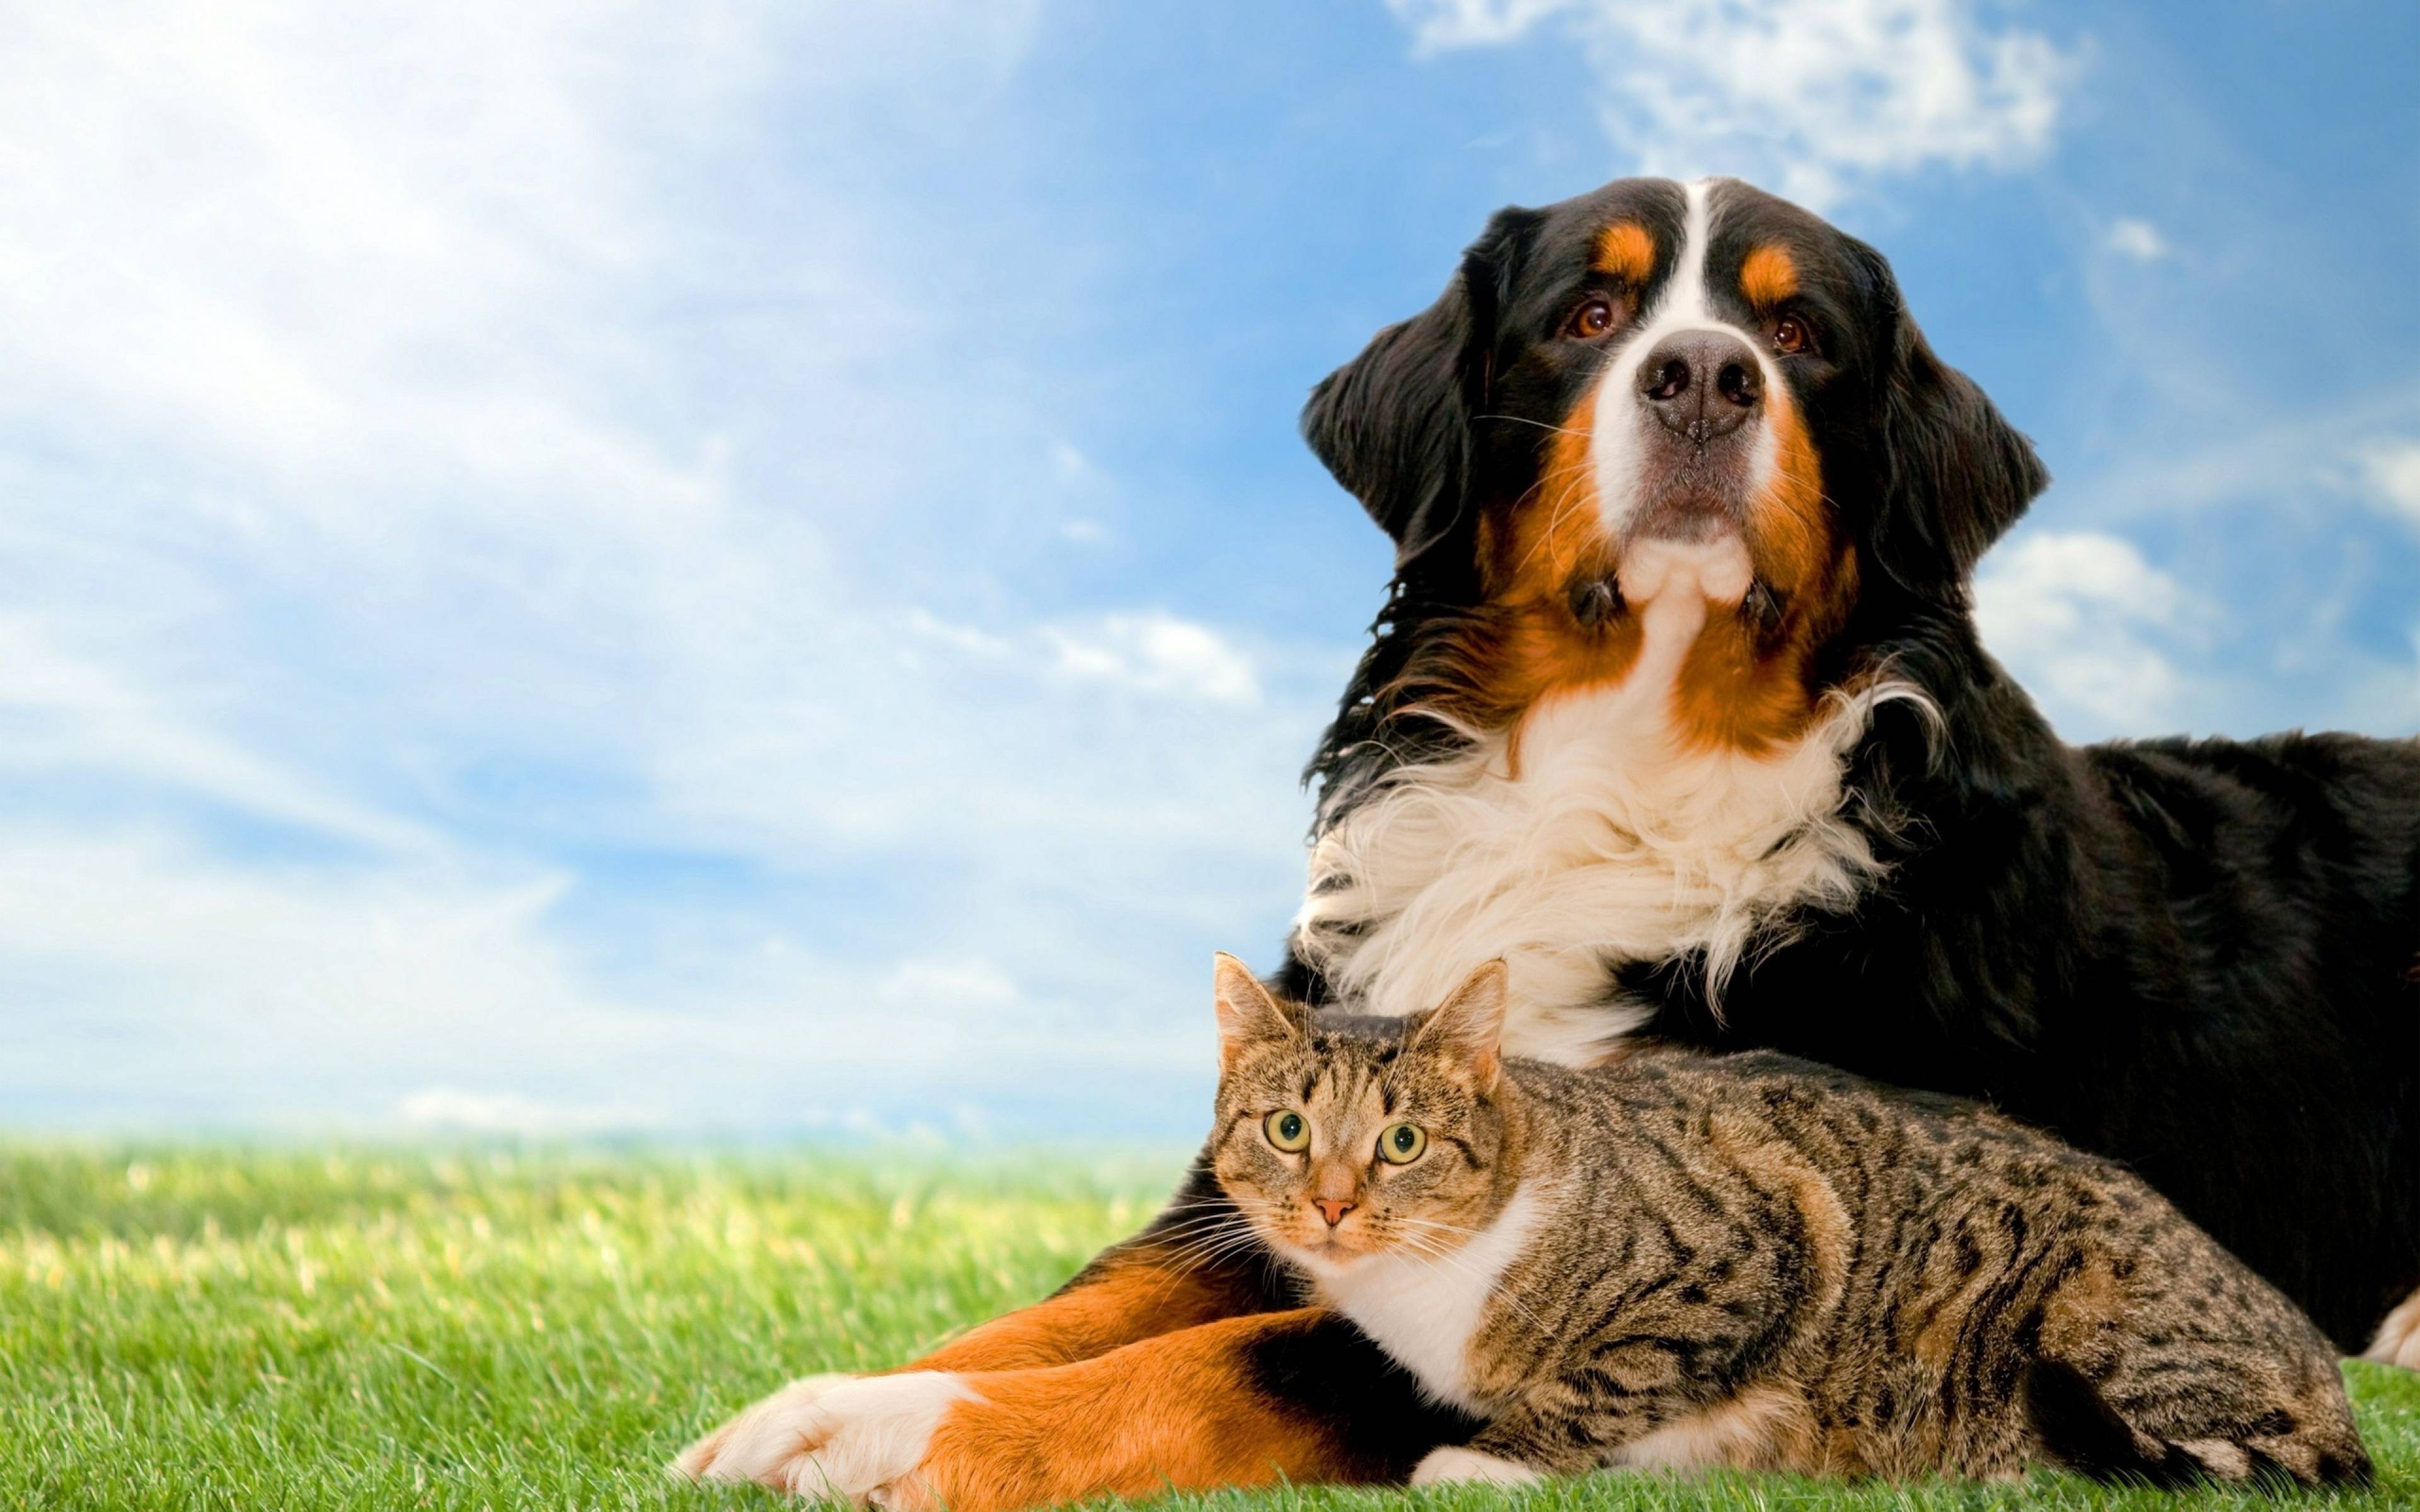 dog and cat image Search Engine